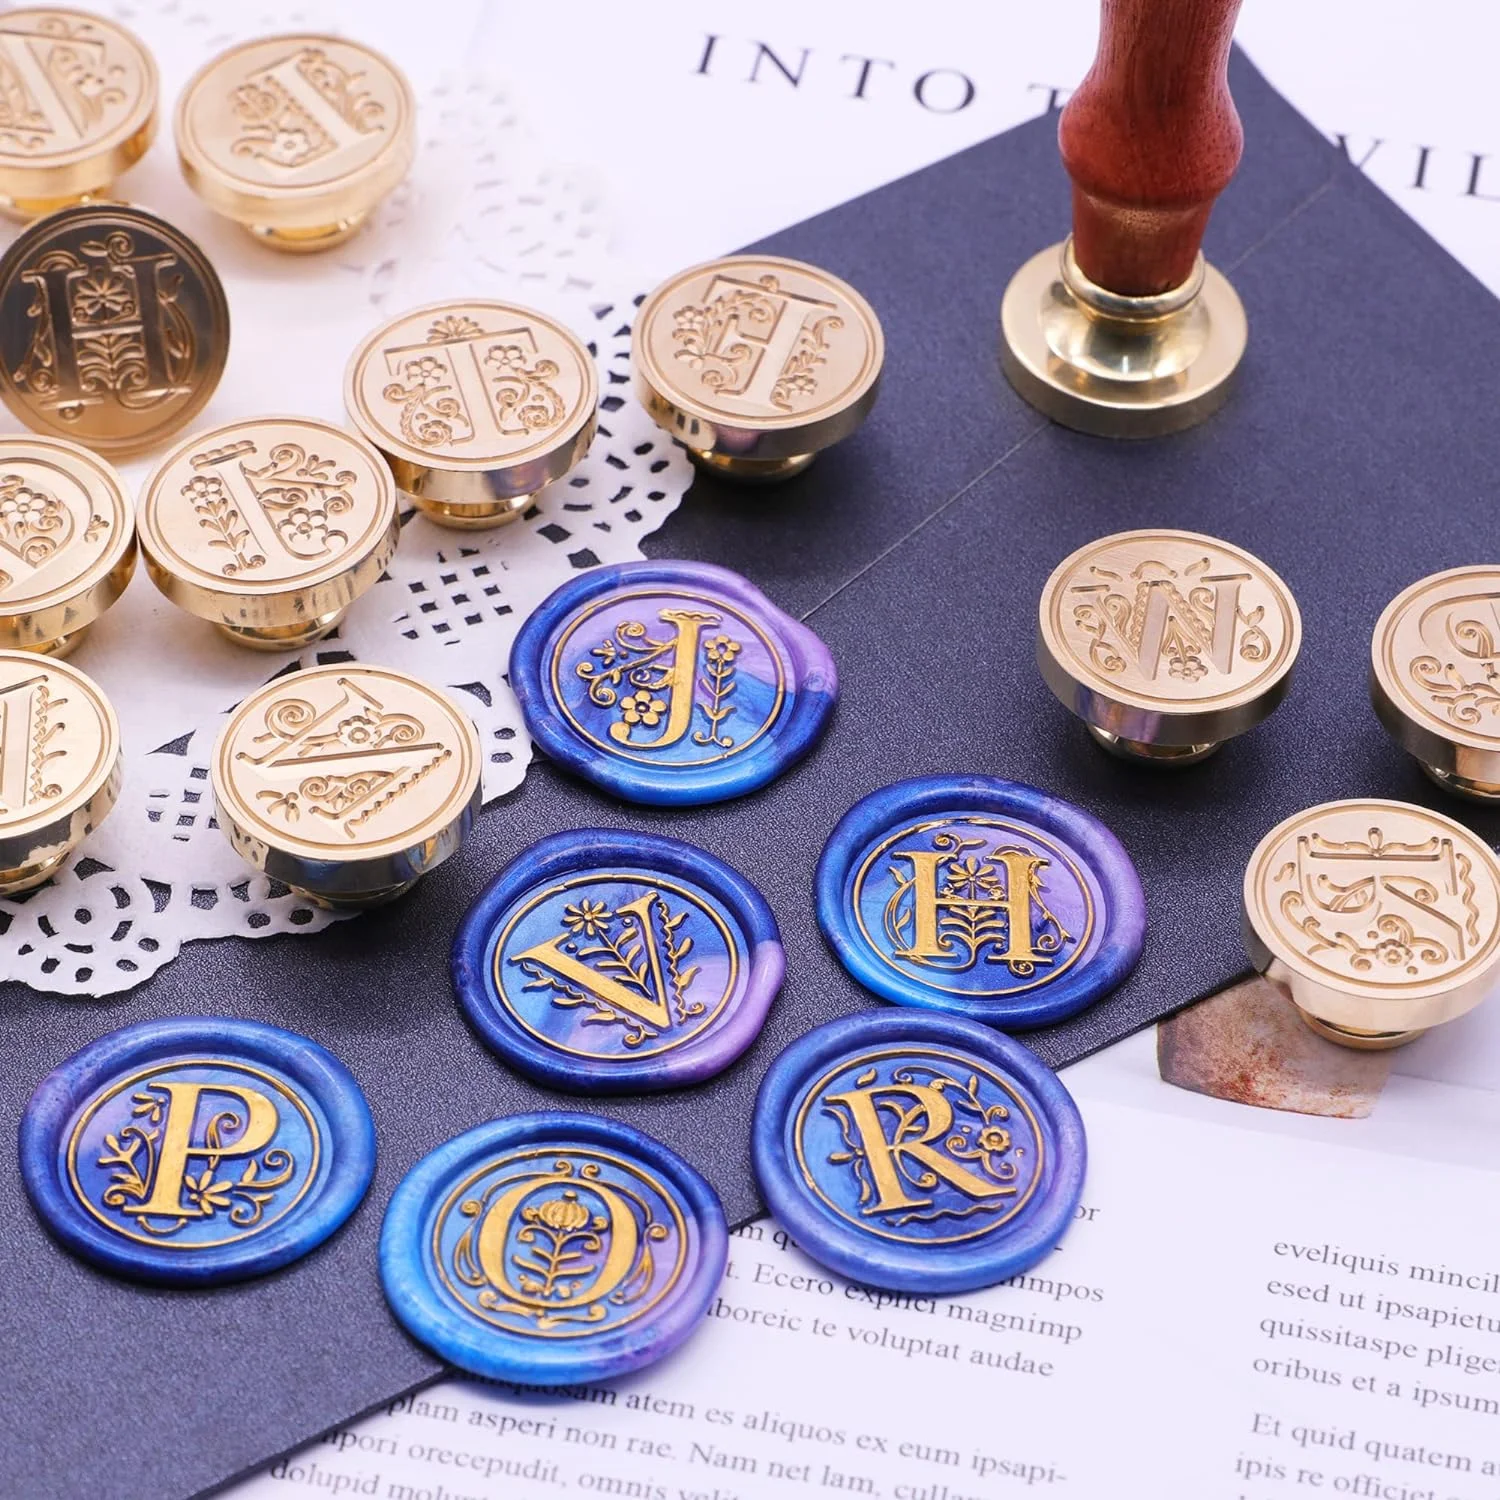 Europe Retro Sealing Wax Stamp Head 26 A-Z Initial Letters Seals Stamp Set Tools Post Decor Wood Stamps Antique Wax Seal Stamp